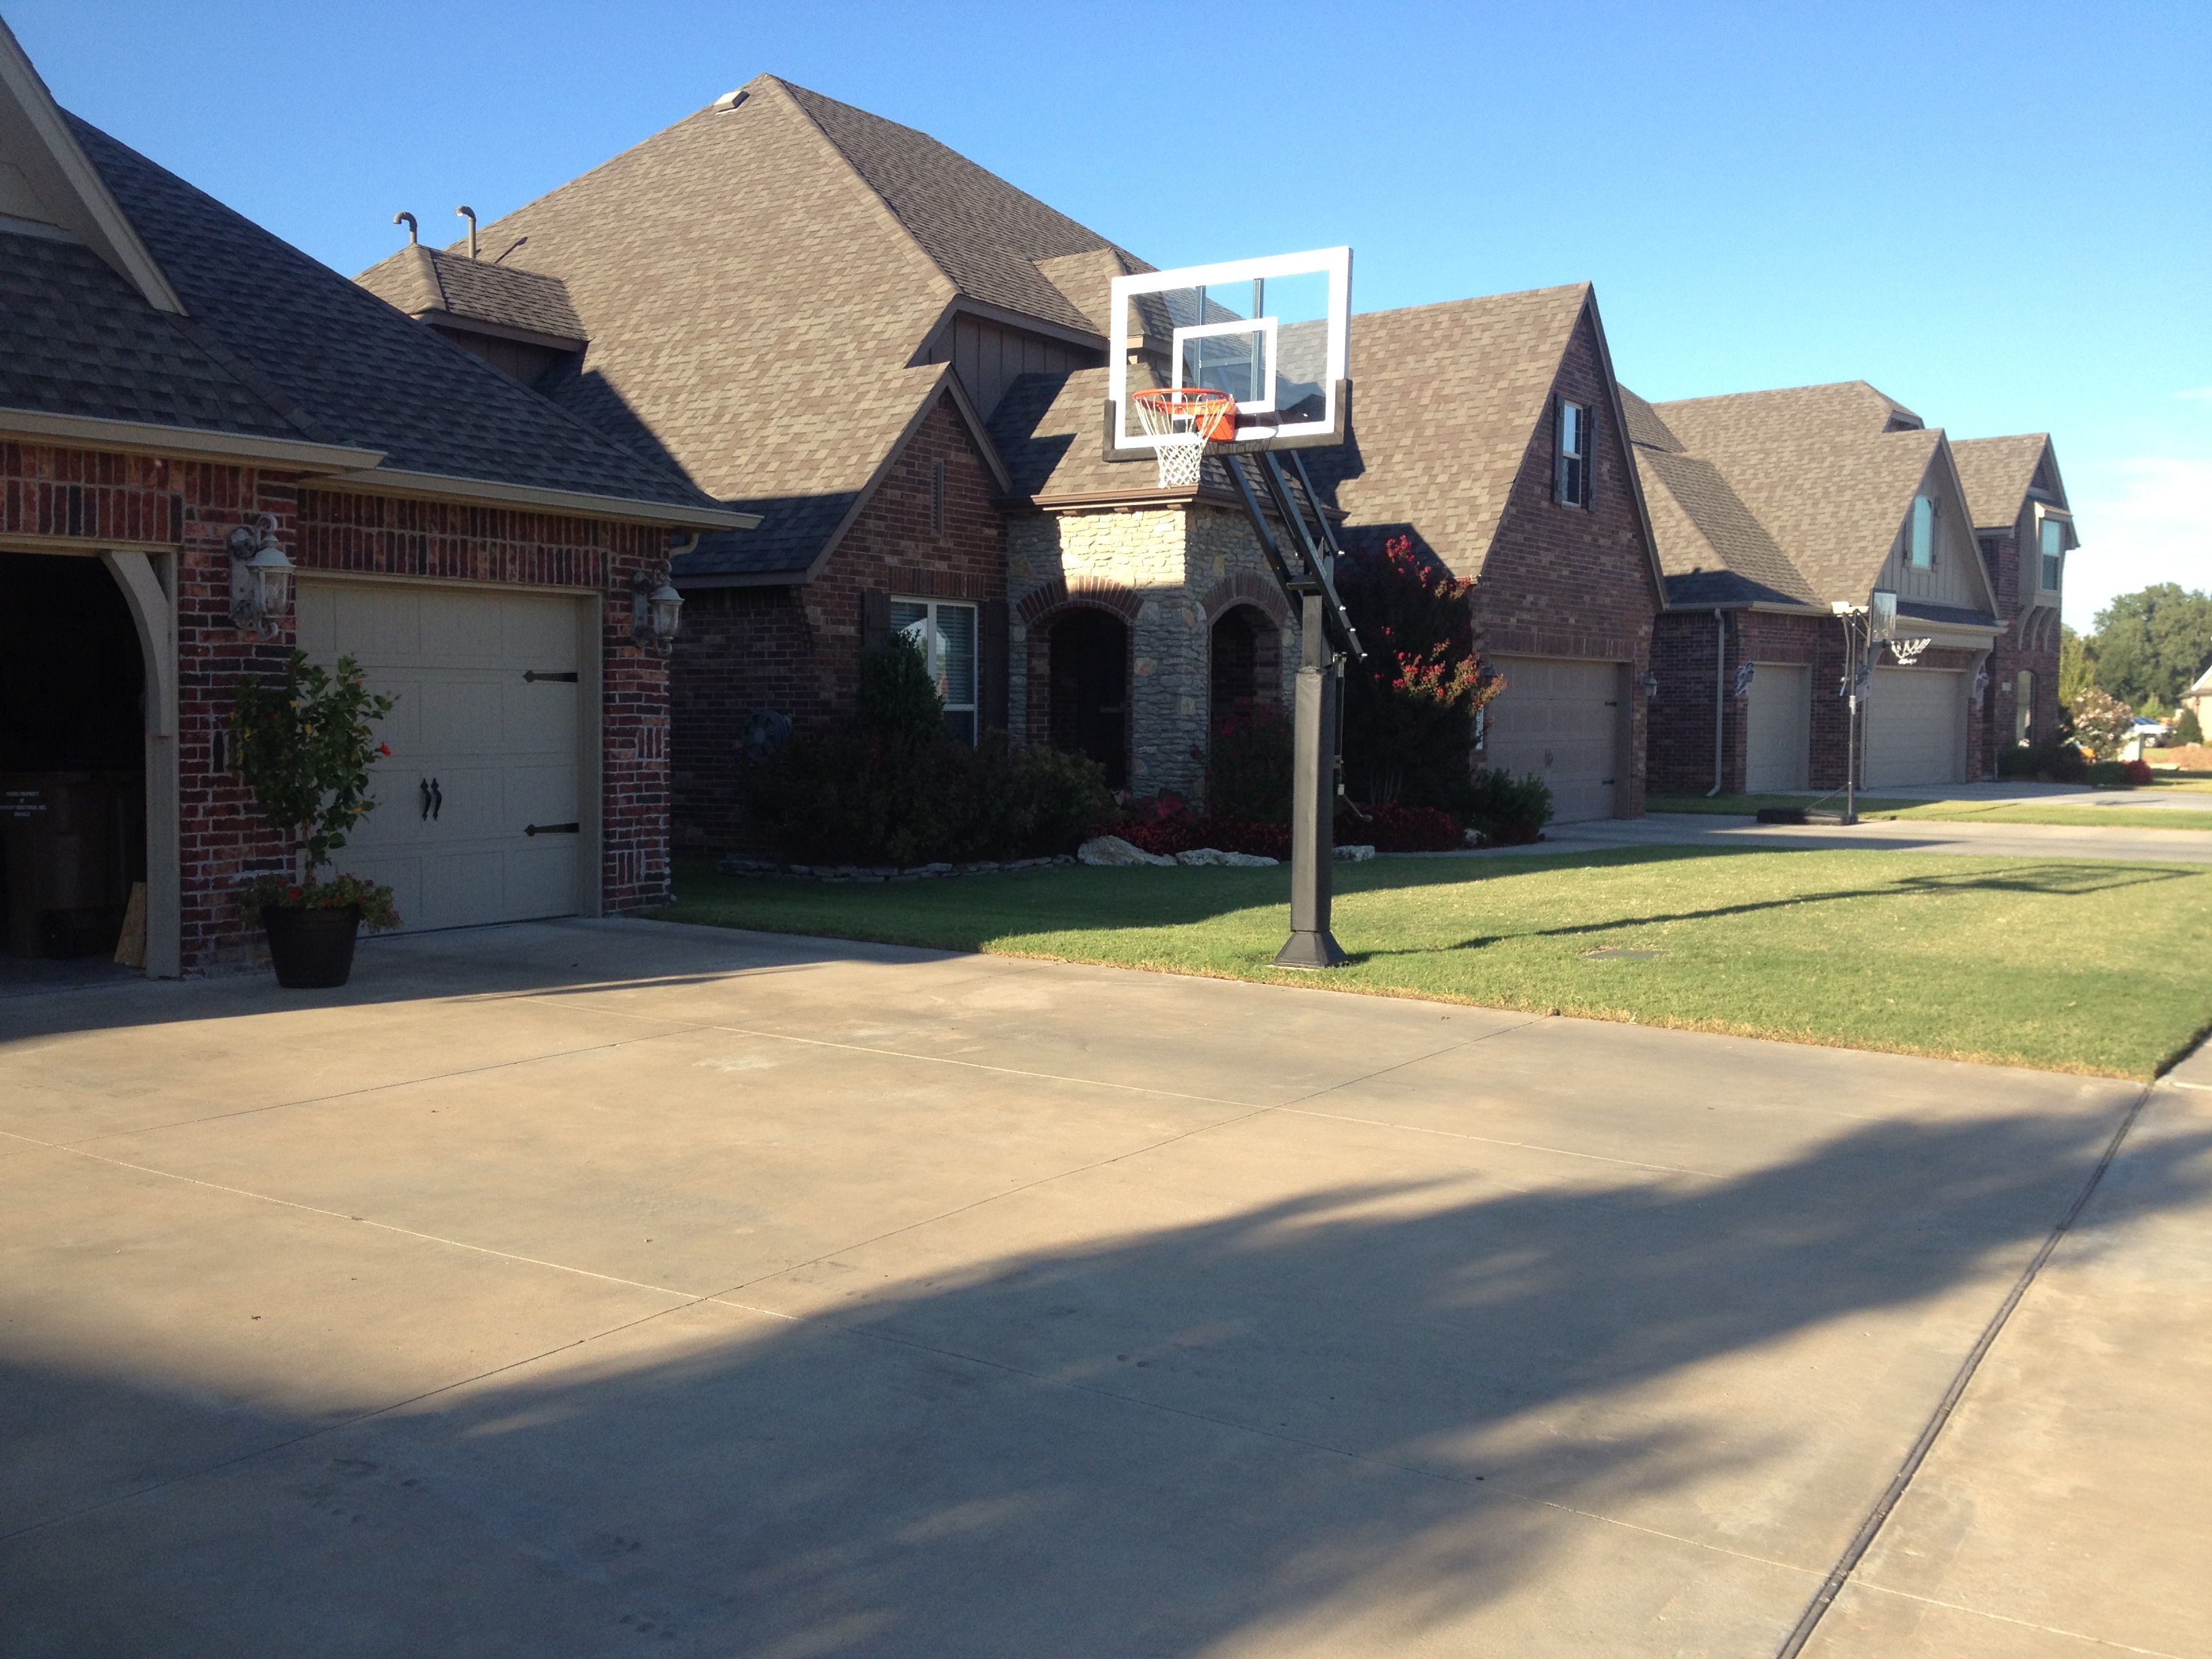 You can see her Pro Dunk Silver Basketball System that is perfectly assembled on the side of her wide concrete driveway.